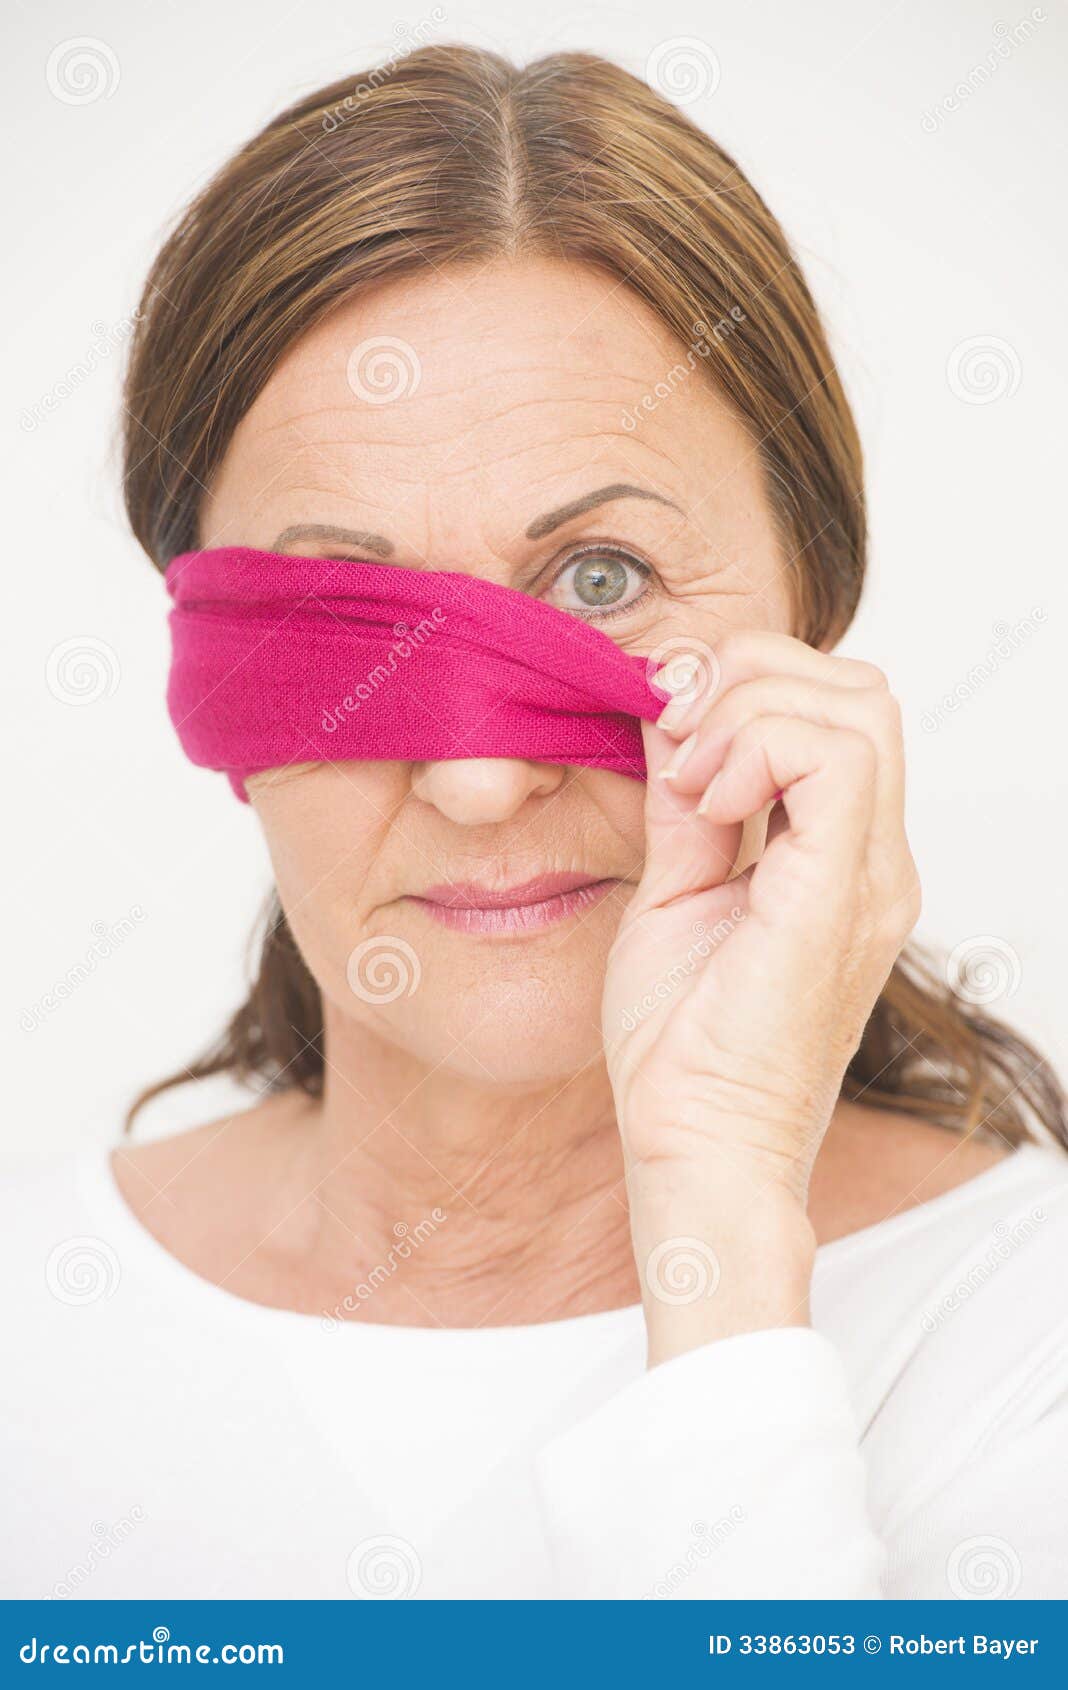 One Eye Blindfolded Mature Woman Stock Image Image Of Serious Hand 33863053